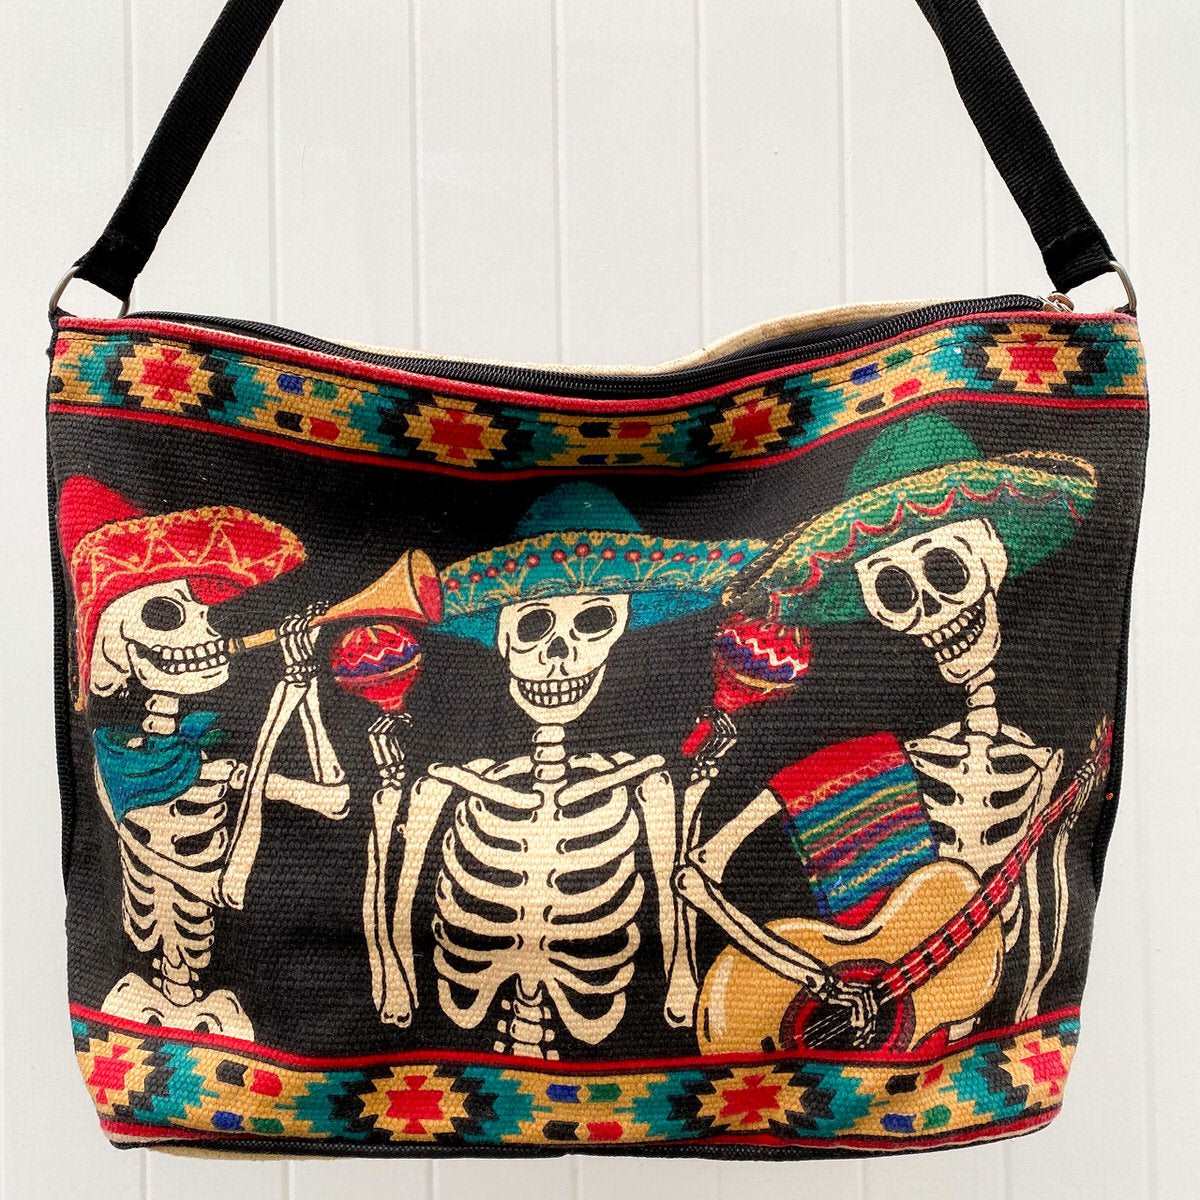 Day of the Dead Tres Amigos skeleton design in black, red, yellow and green, silkscreened on cotton handbag with black cotton strap, shown against white background.